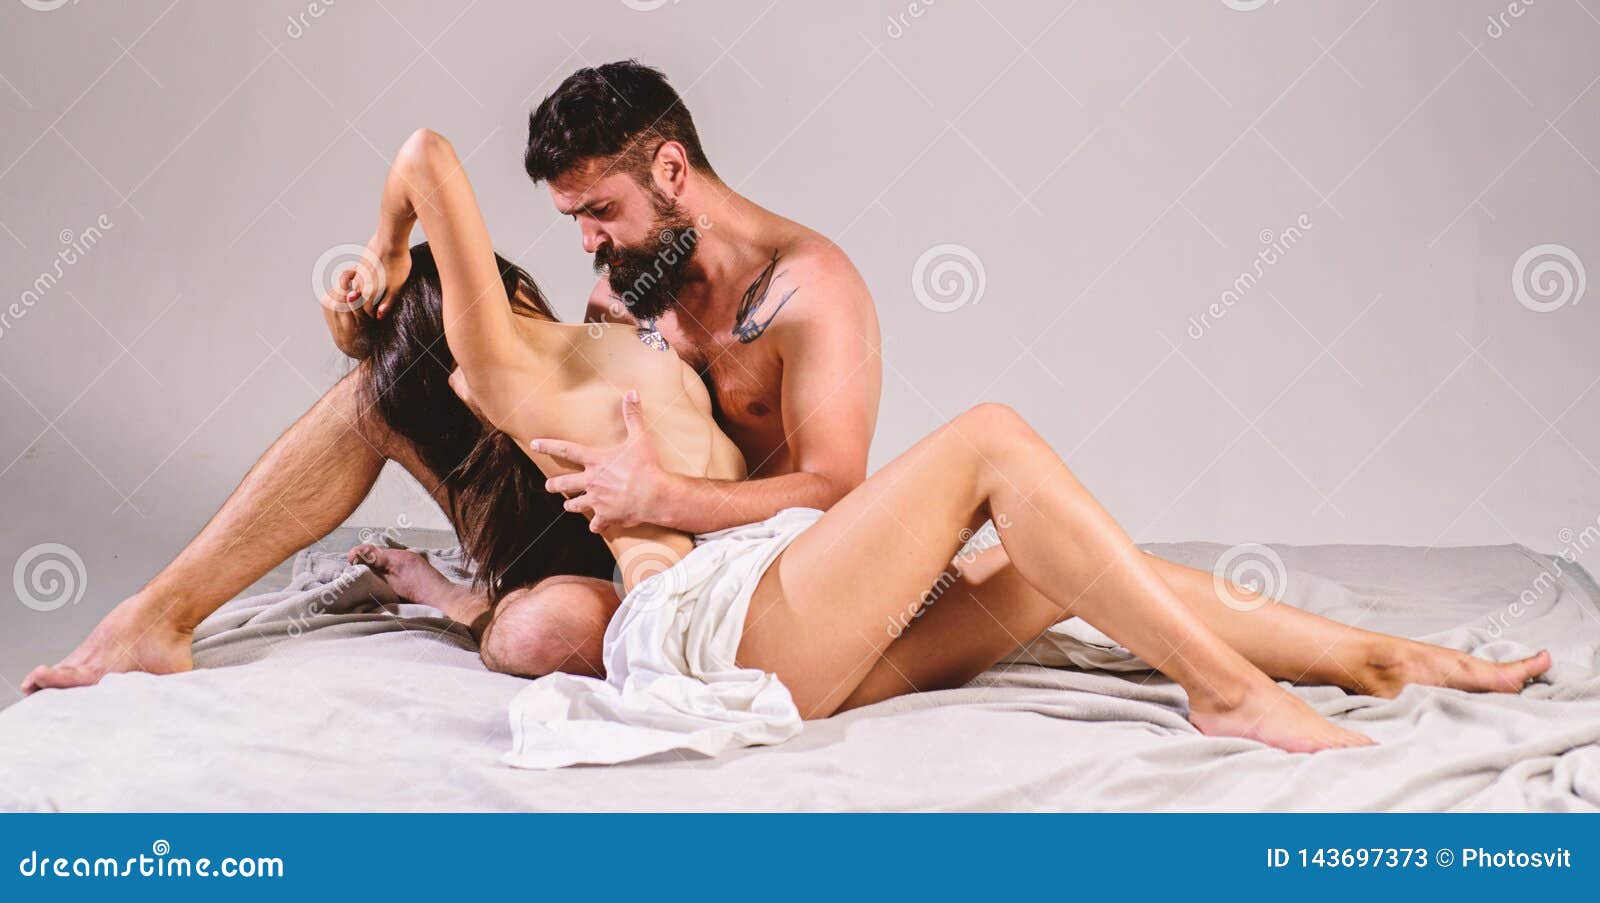 Images Of Man Licking Womans Pussy